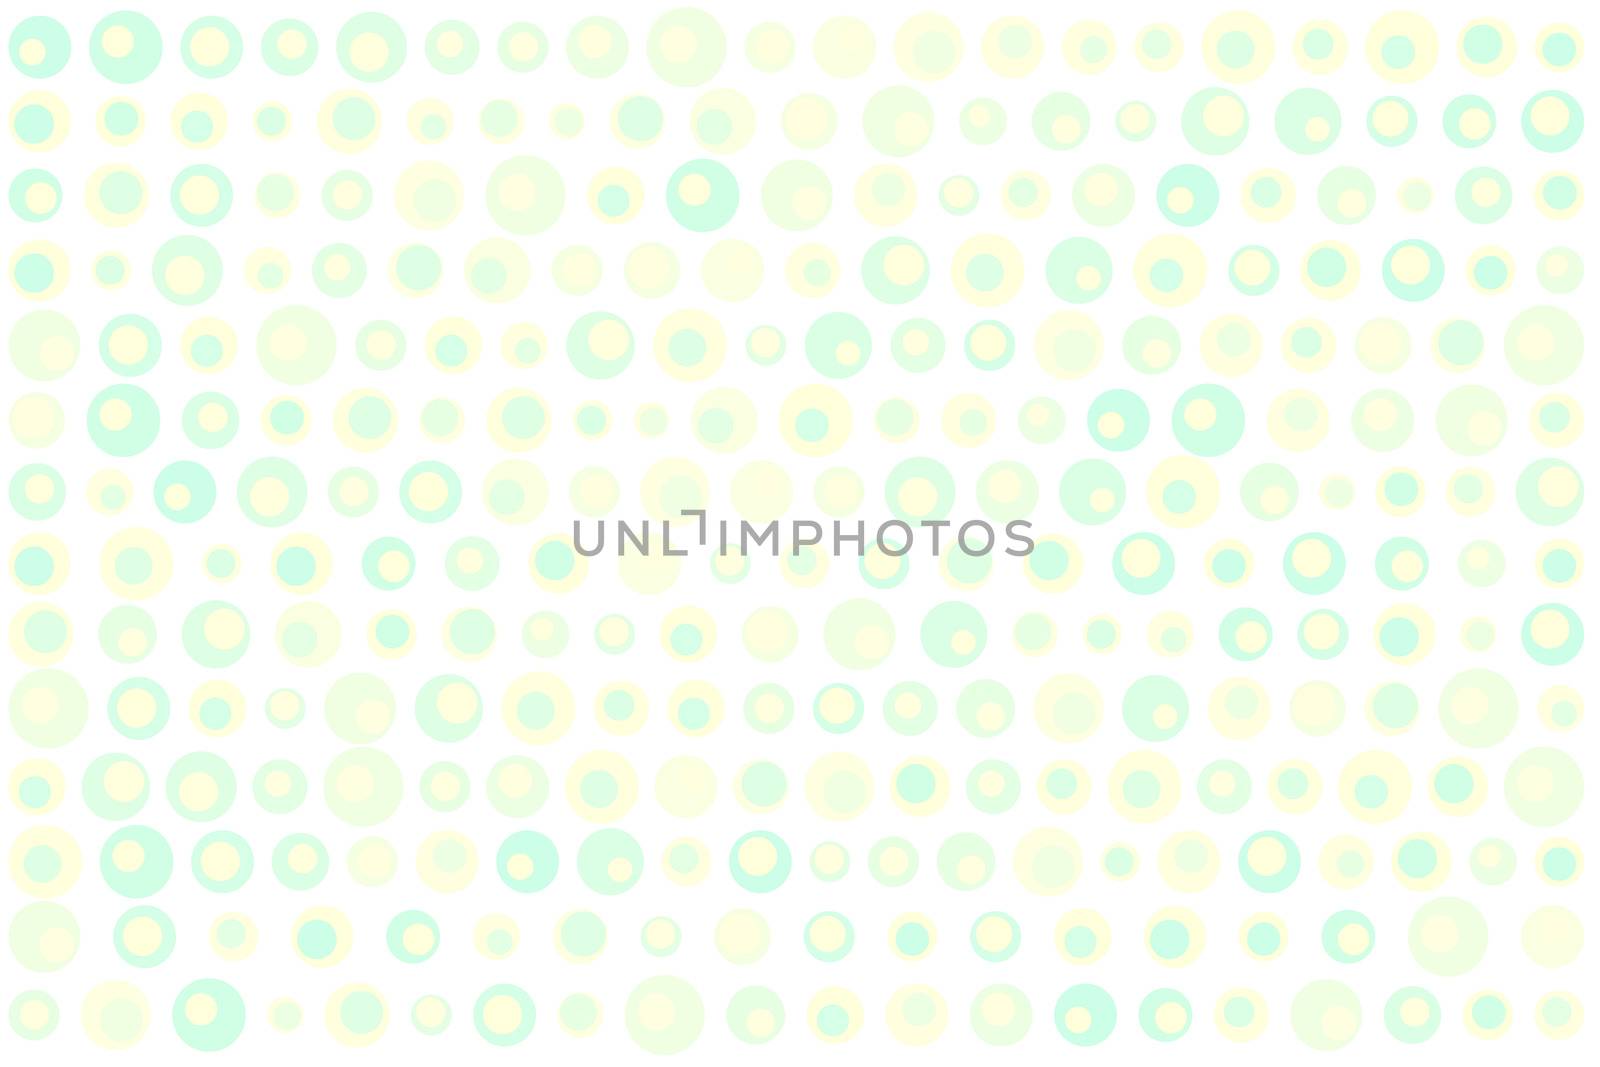 Texture background made of  green, turquoise and yellow dots, or circles